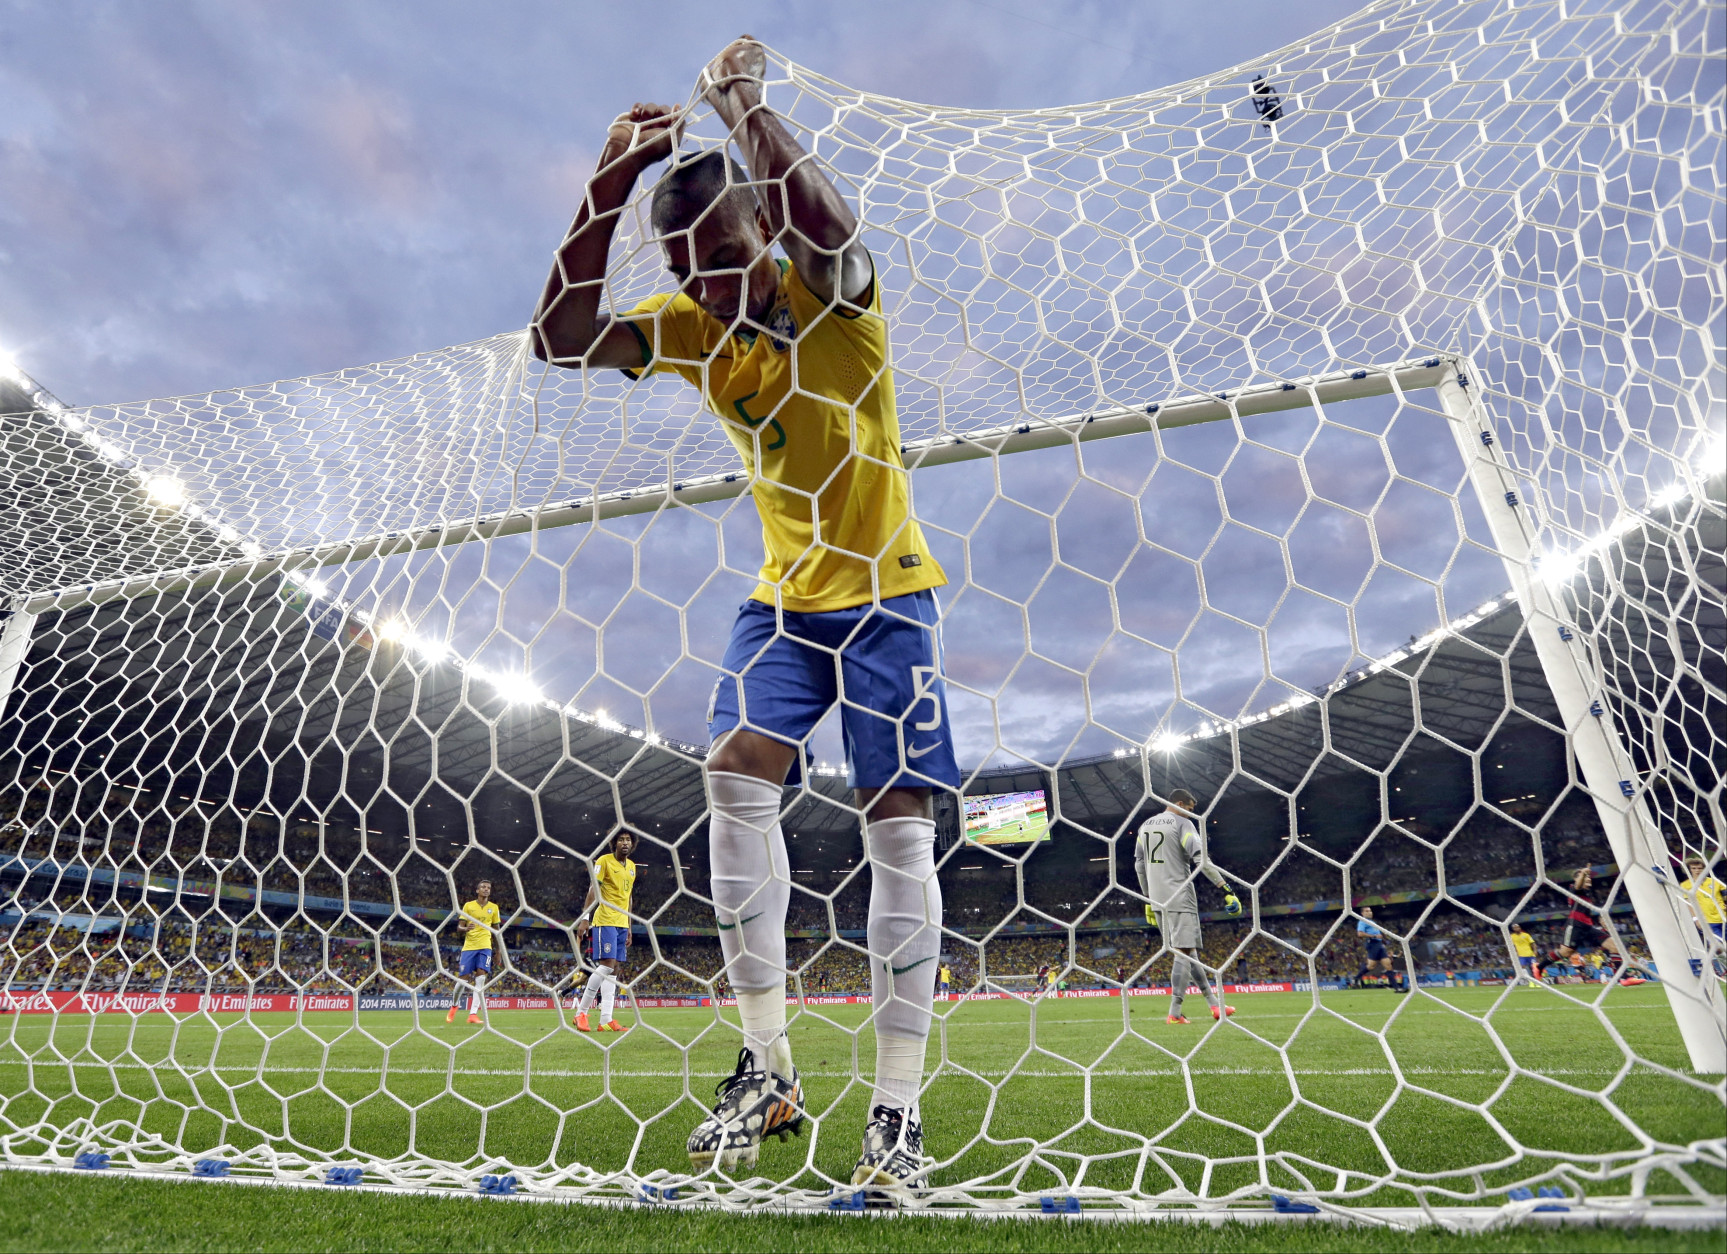 FOR USE AS DESIRED, YEAR END PHOTOS - FILE - Brazil's Fernandinho reacts after Germany's Toni Kroosduring scored his side's third goal during the World Cup semifinal soccer match between Brazil and Germany at the Mineirao Stadium in Belo Horizonte, Brazil, Tuesday, July 8, 2014. (AP Photo/Natacha Pisarenko, File)